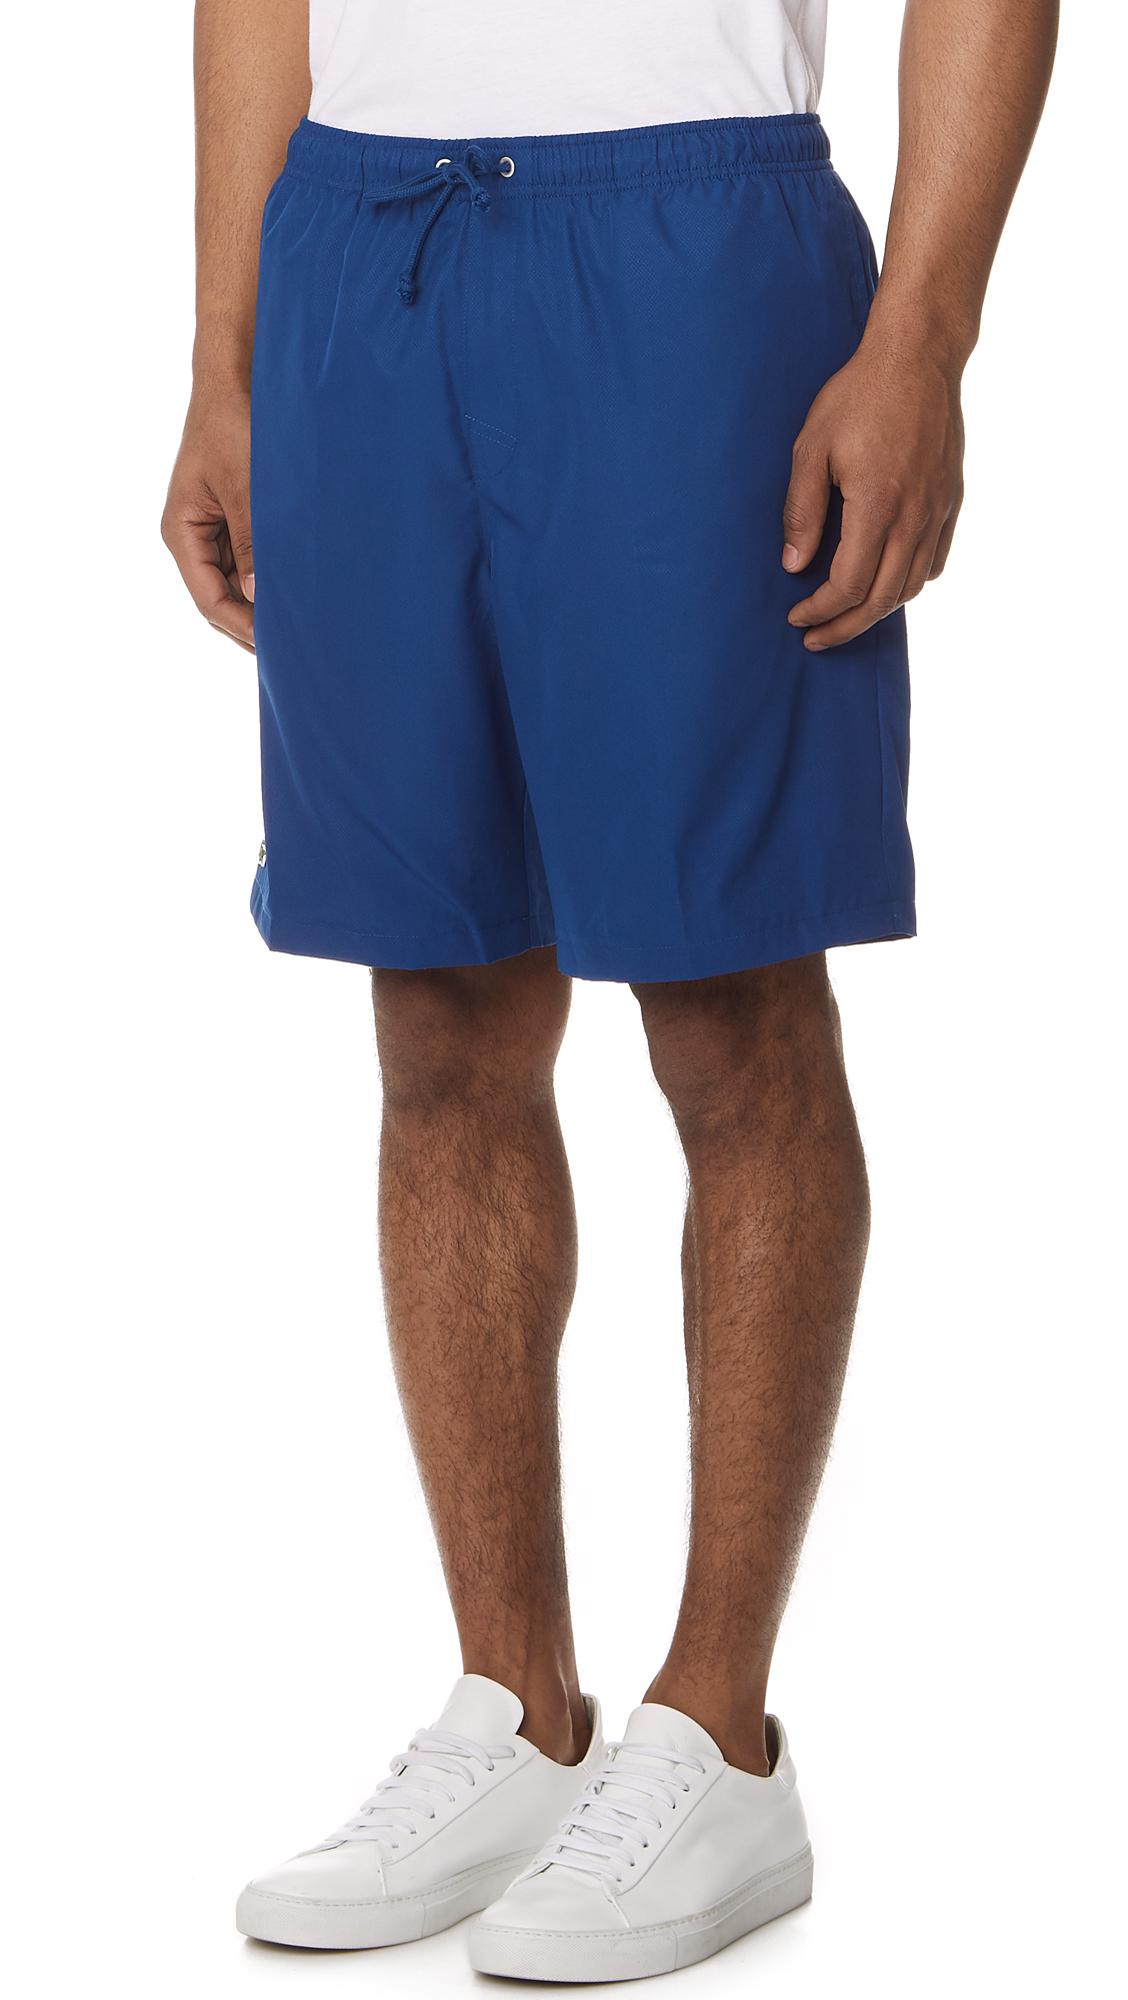 Lacoste Synthetic Sport Lined Tennis Shorts in Blue for Men - Lyst